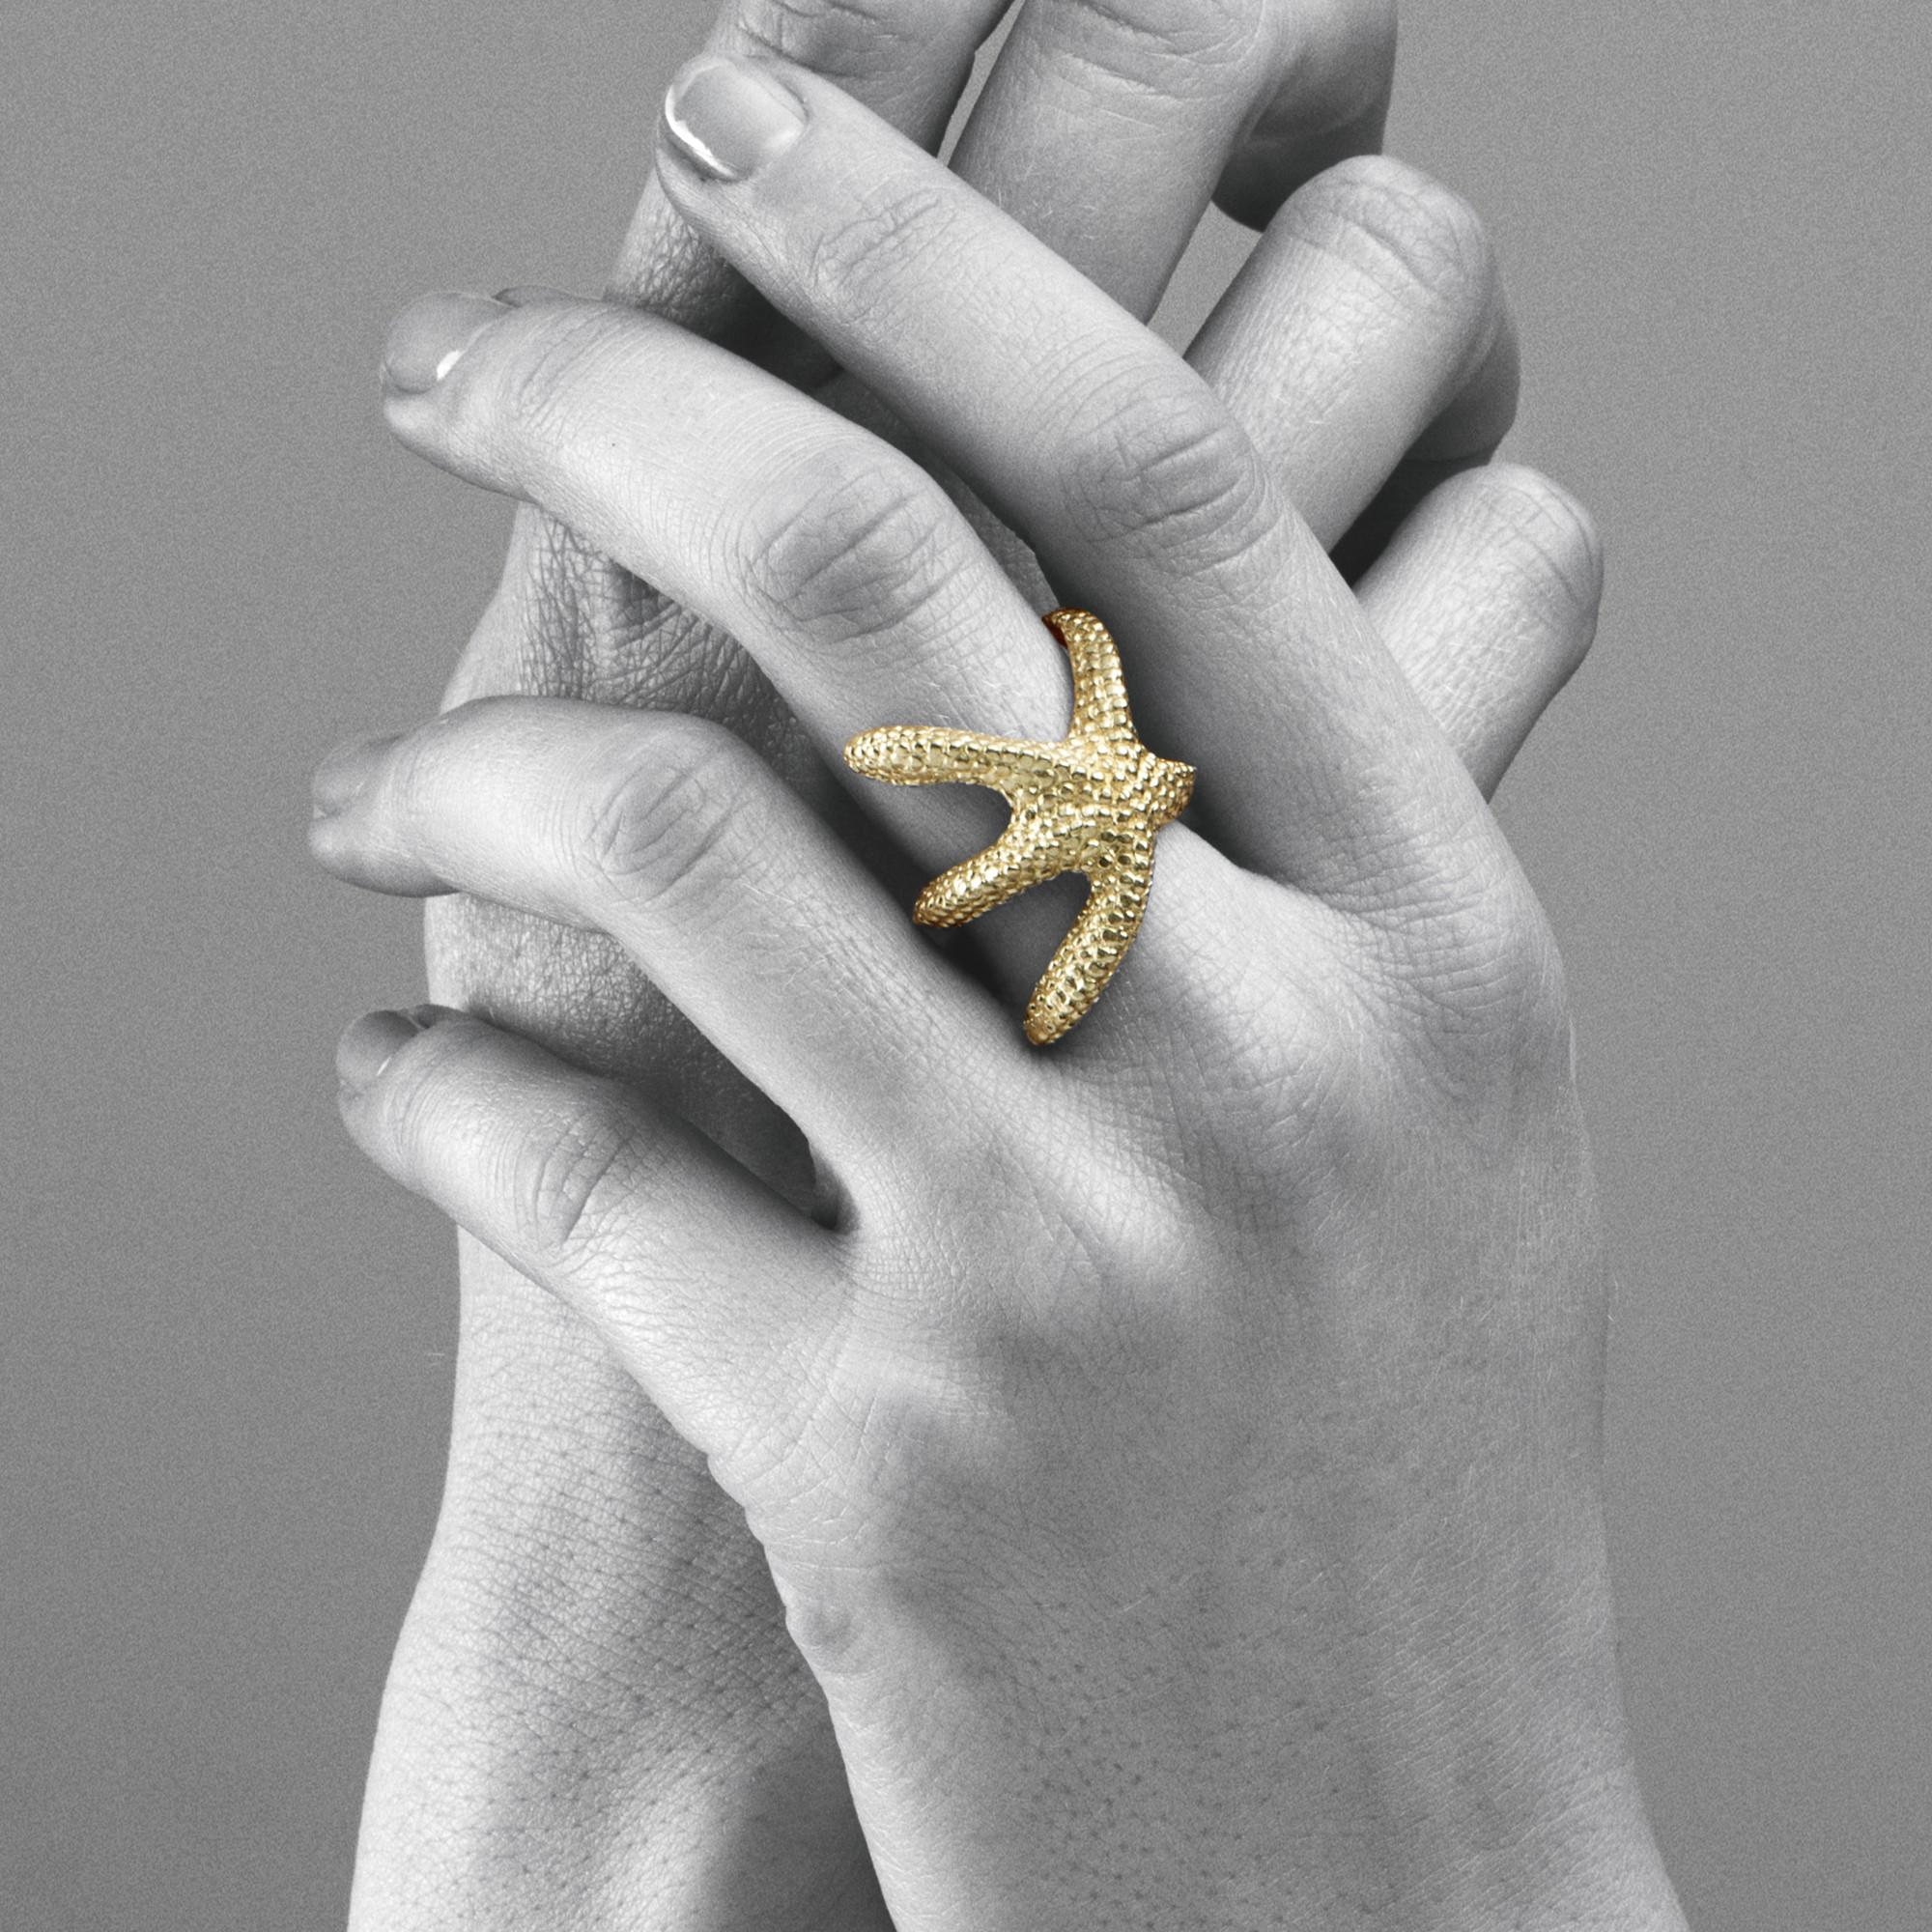 Alex Jona design collection, hand crafted in Italy, 18 Karat yellow gold starfish ring. 
Size 6, can be sized to any specification.
Dimensions: H x 1.02 in. W x 0.89 in. D x 0.15 in. -  H x 25.98 mm. W x 22.84 mm. D x 3.83 mm.
Alex Jona jewels stand